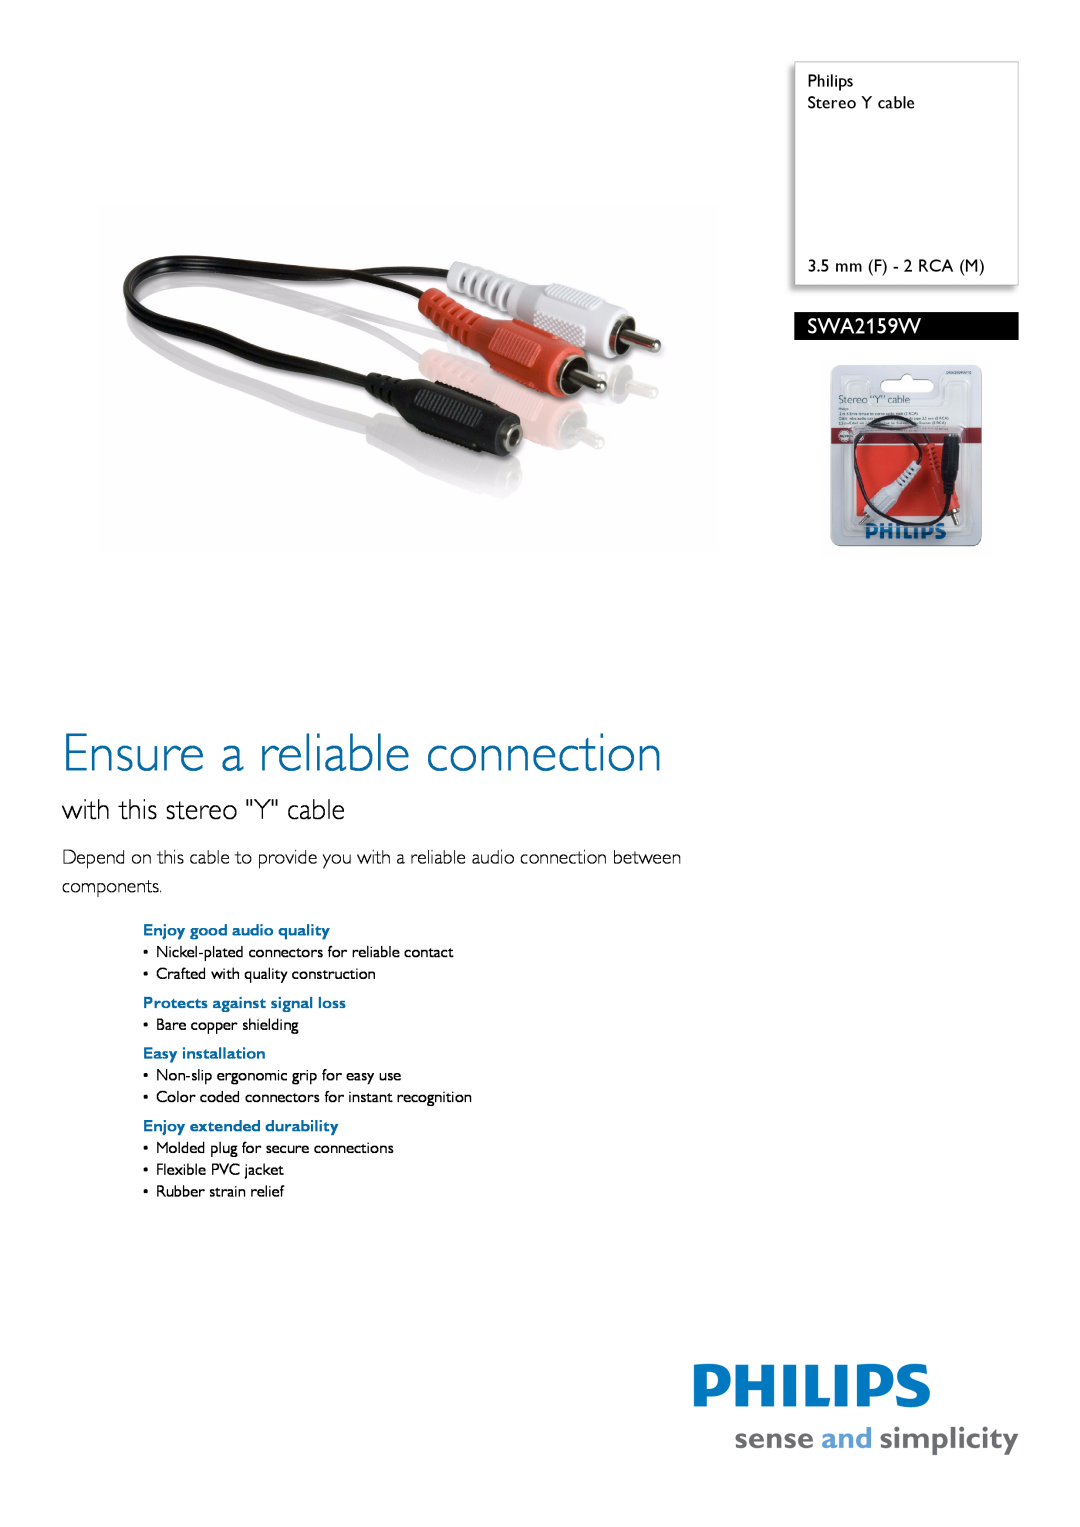 Philips SWA2159W/10 manual Philips Stereo Y cable 3.5 mm F - 2 RCA M, Ensure a reliable connection 